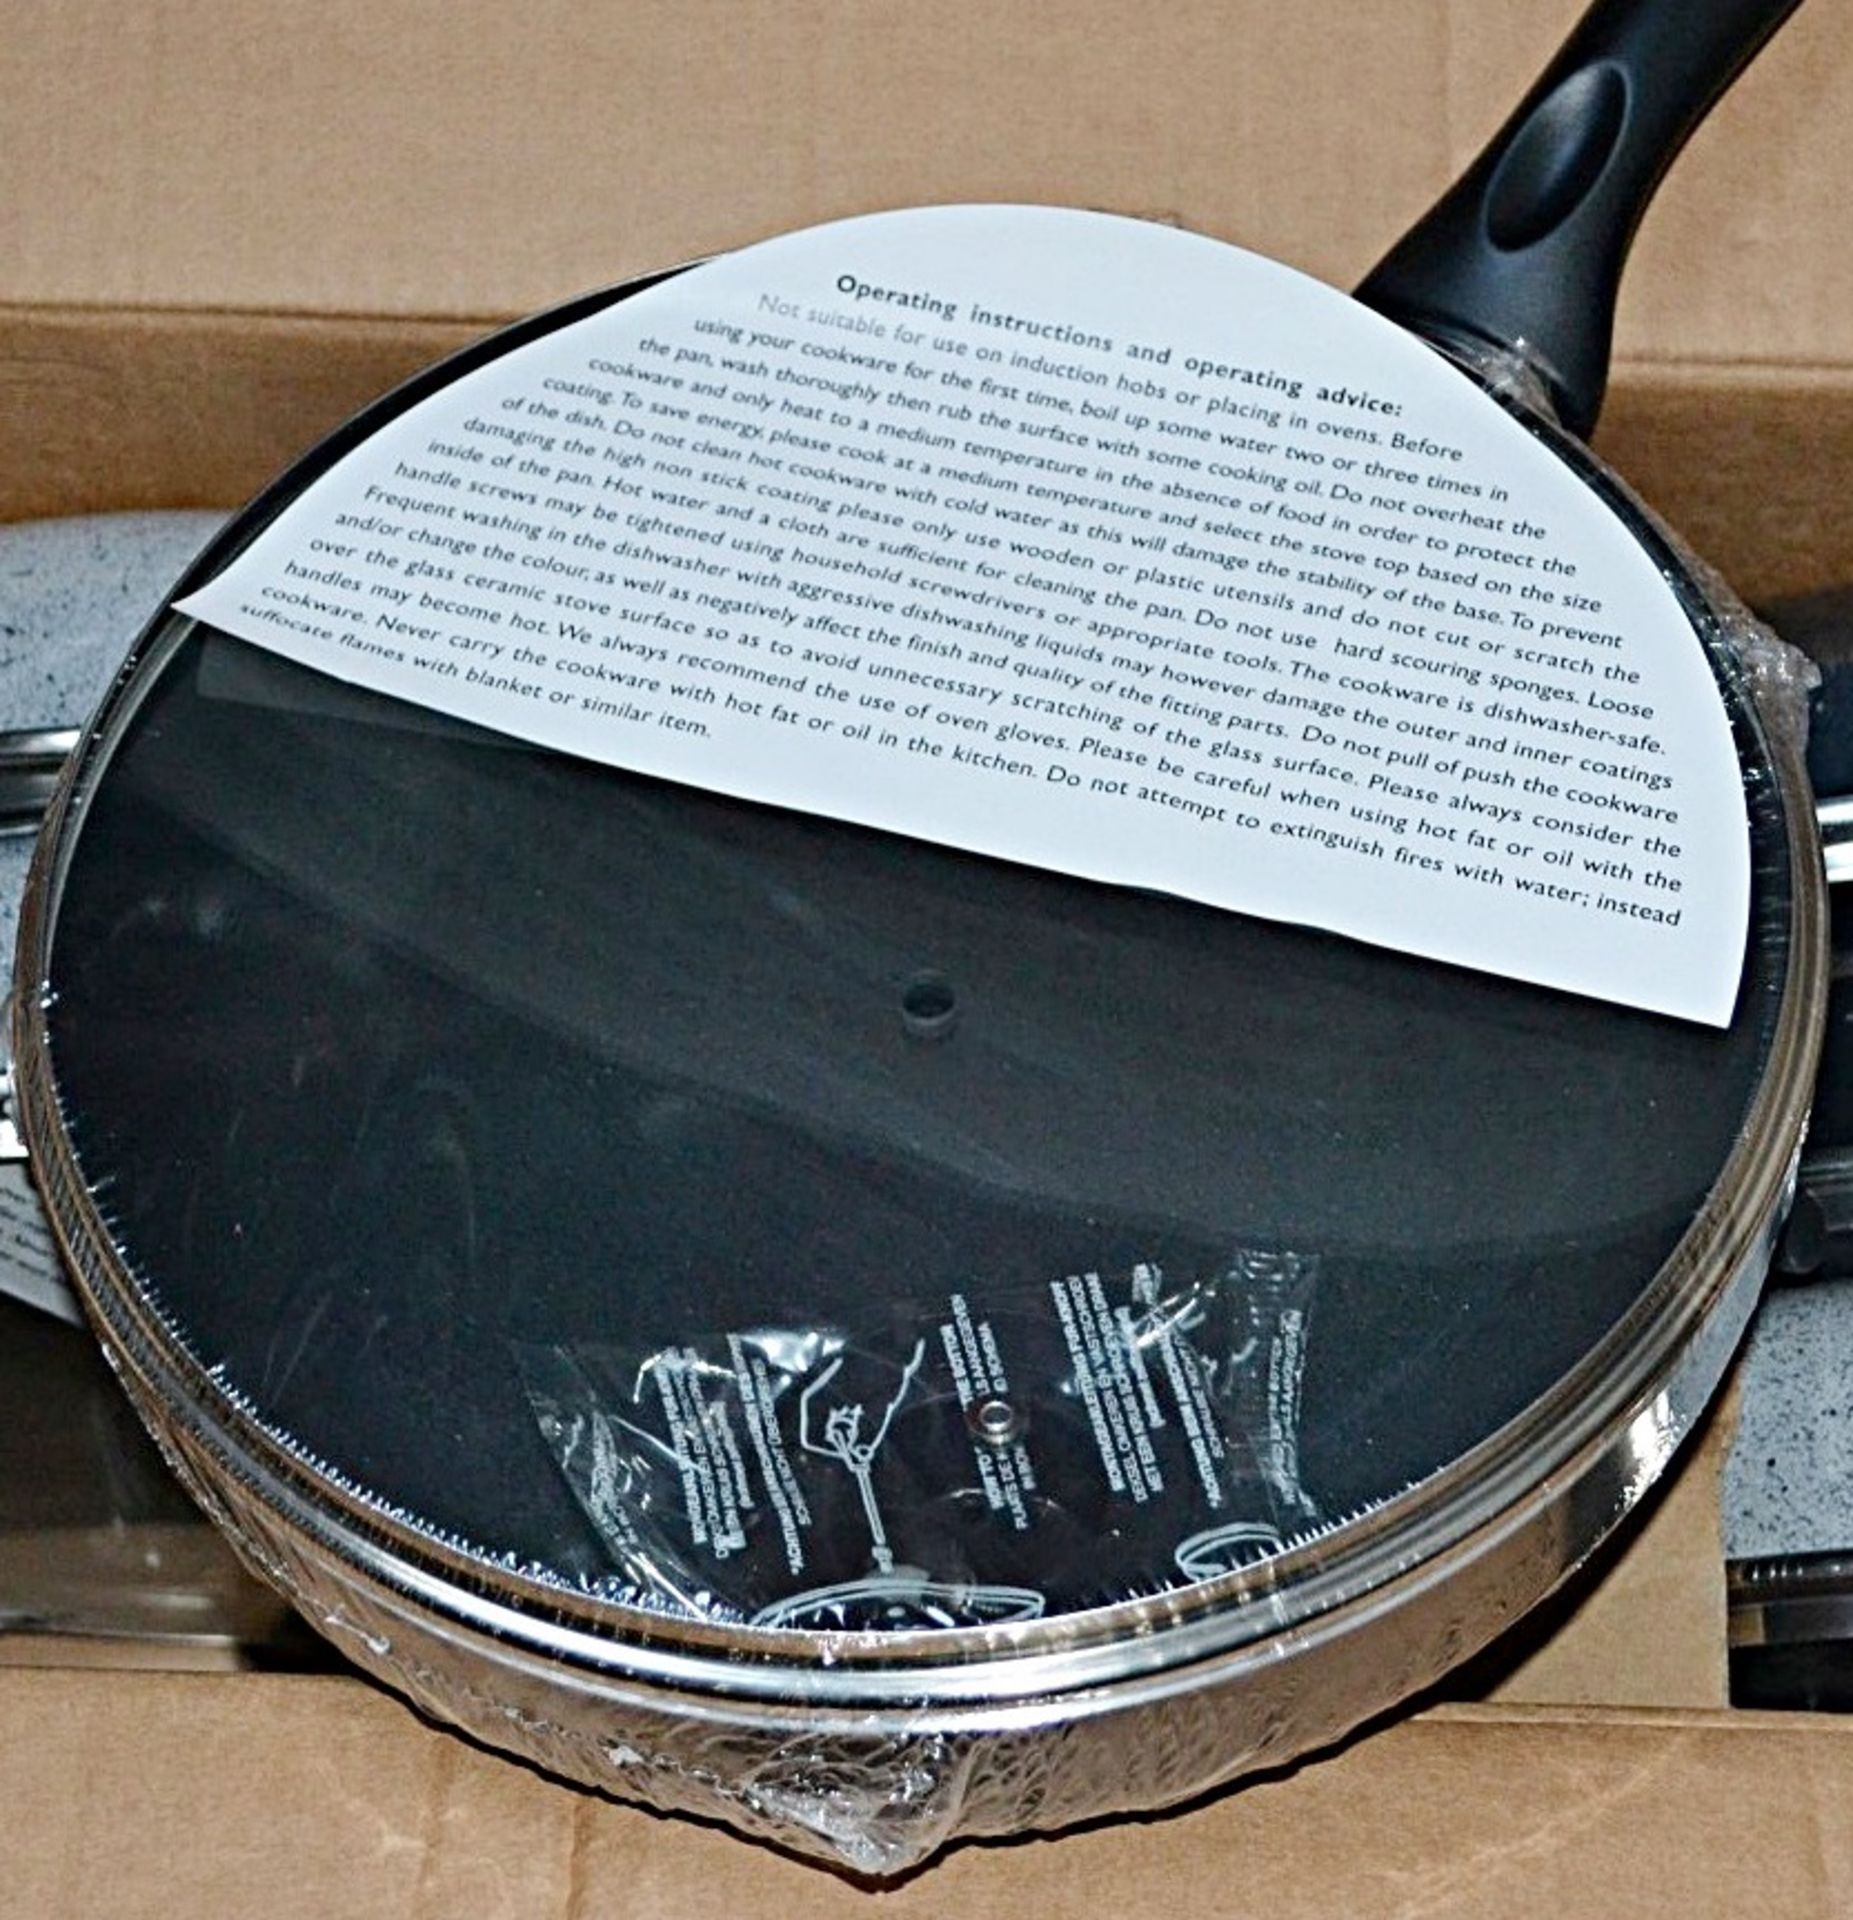 1 x 28cm Non-stick Frying Pans with Glass Lids - Colour: Stone Grey - Made In Italy - New & Sealed S - Image 4 of 5